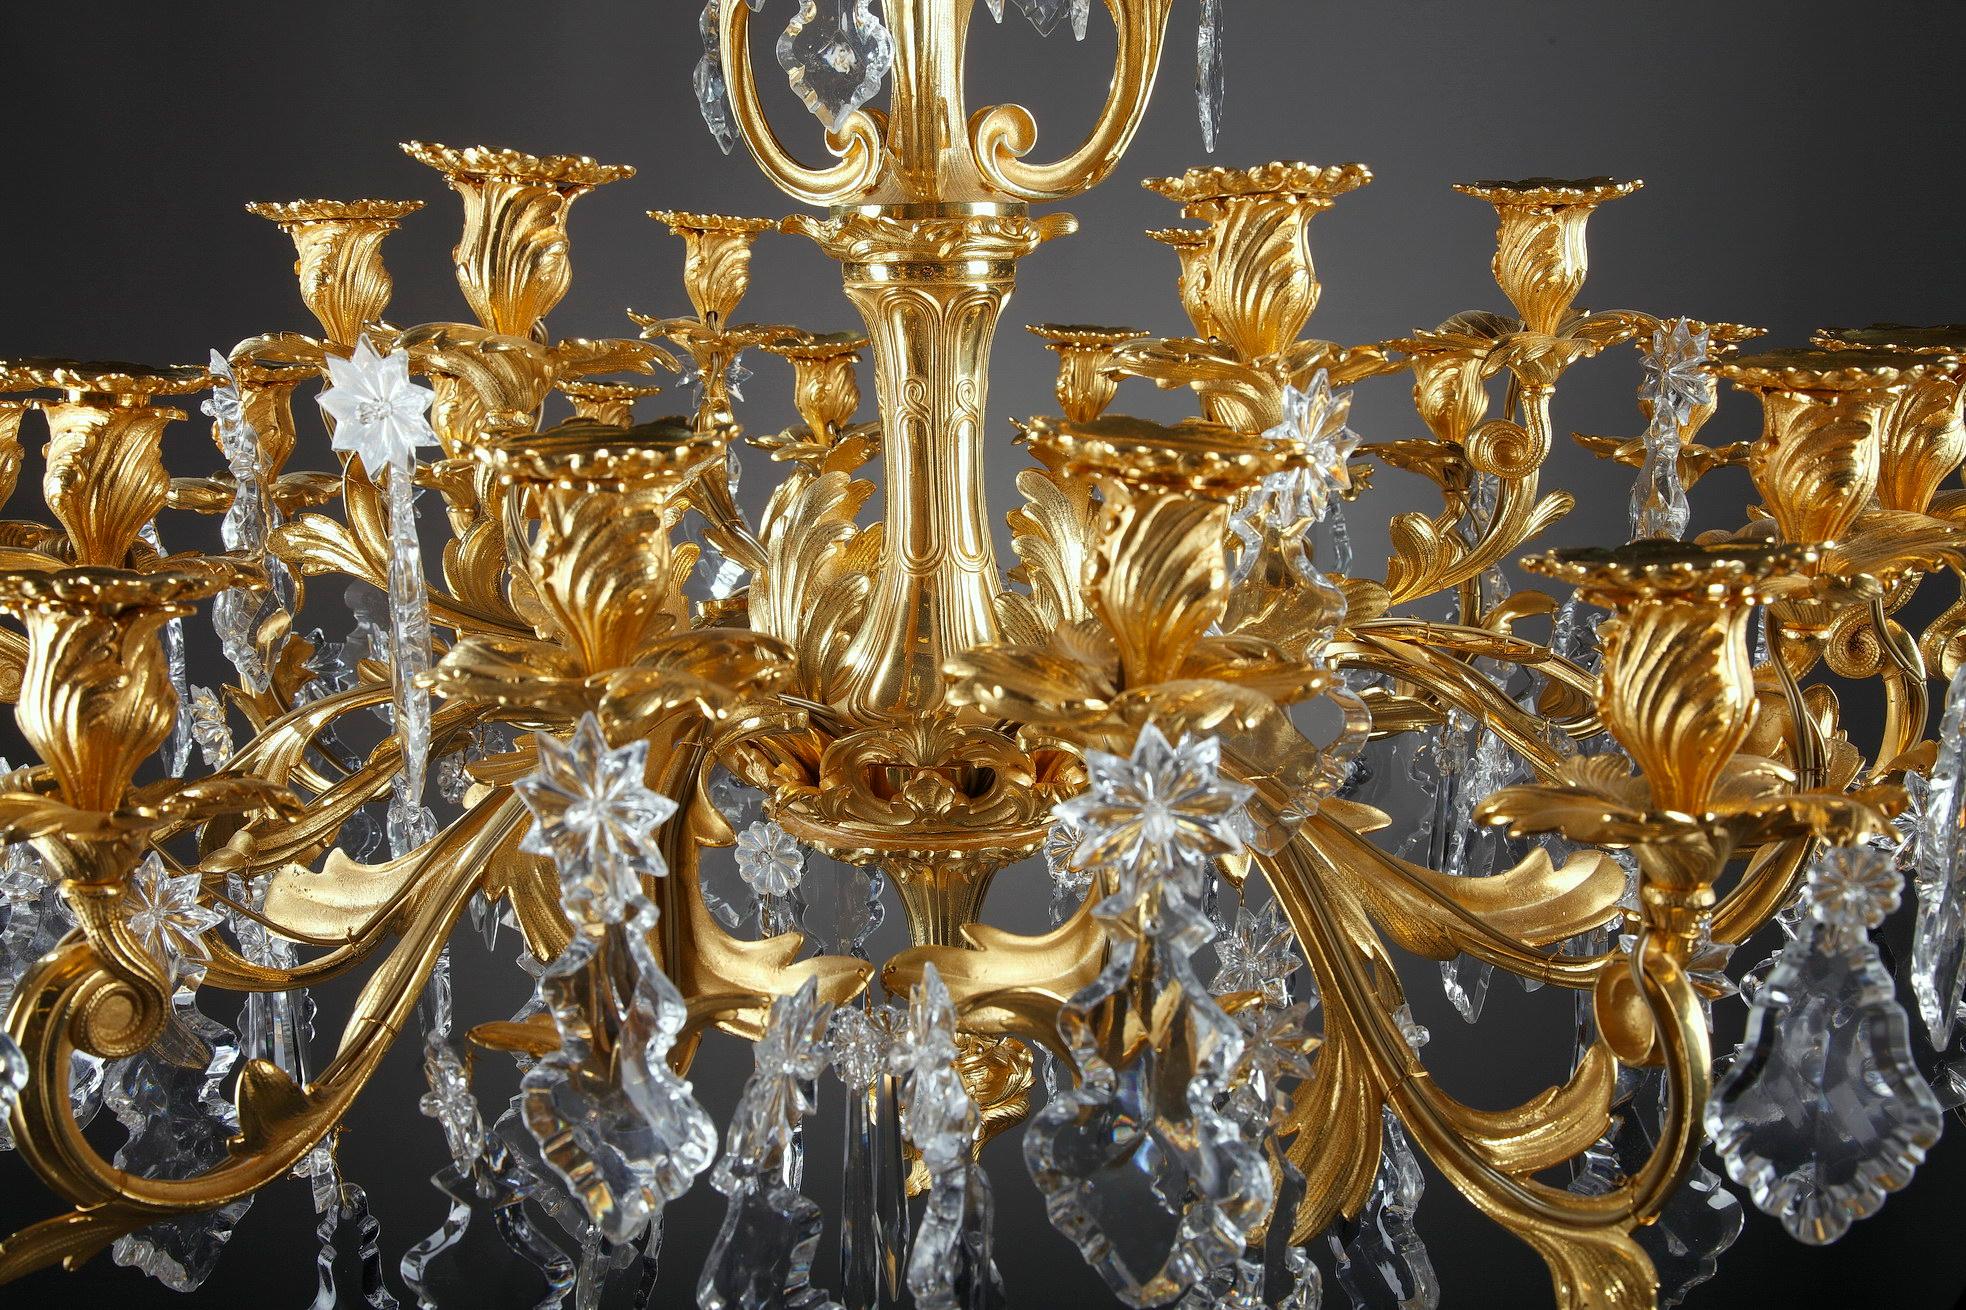 This monumental crystal and ormolu chandelier was designed in Louis XV style. Oversized, luminous slice-cut drops and pendants hang from scrolling Rocaille branches crafted of gilt bronze. With its organic swirls and curves of scrolls and acanthus